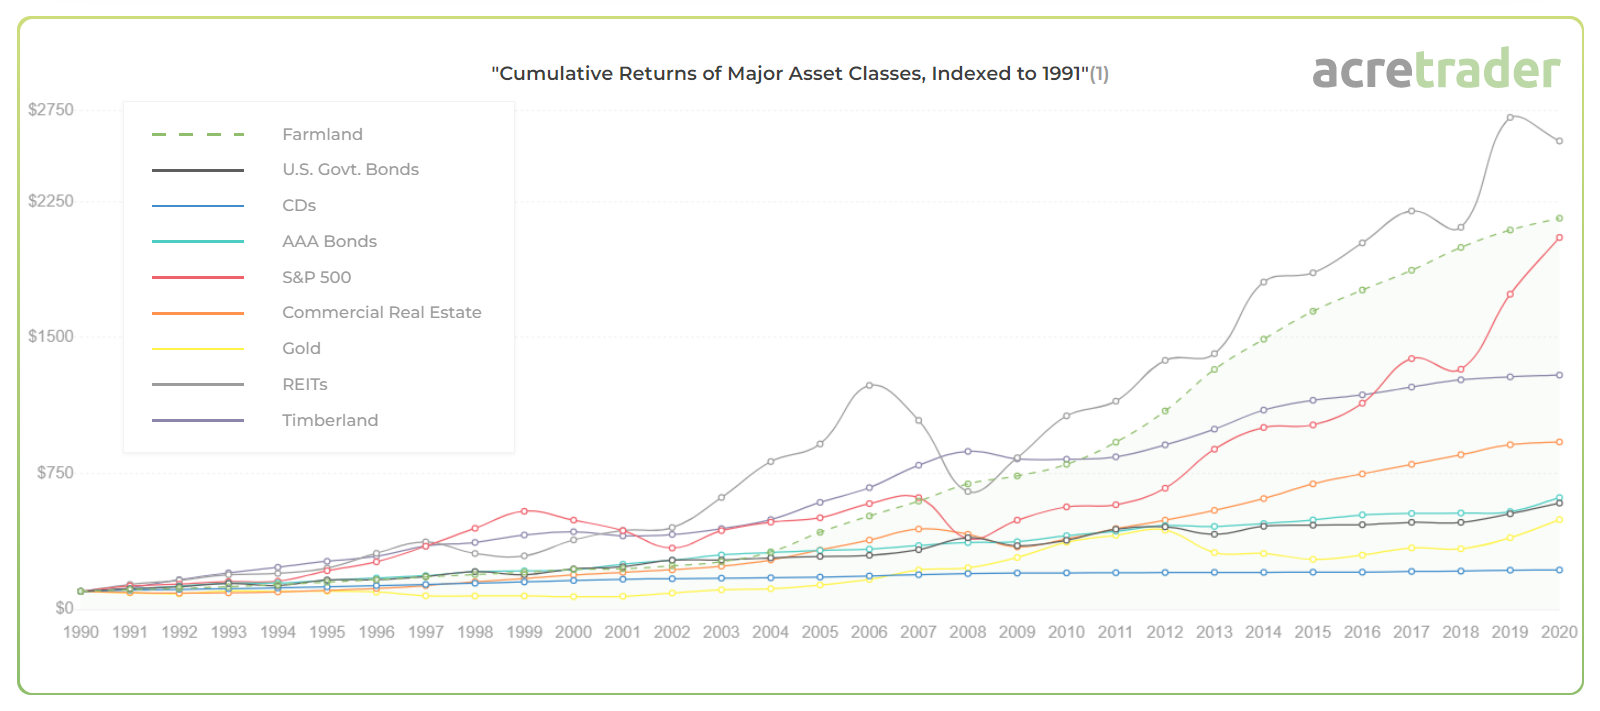 Cumulative returns if you invested $100 in different asset classes in 1990.